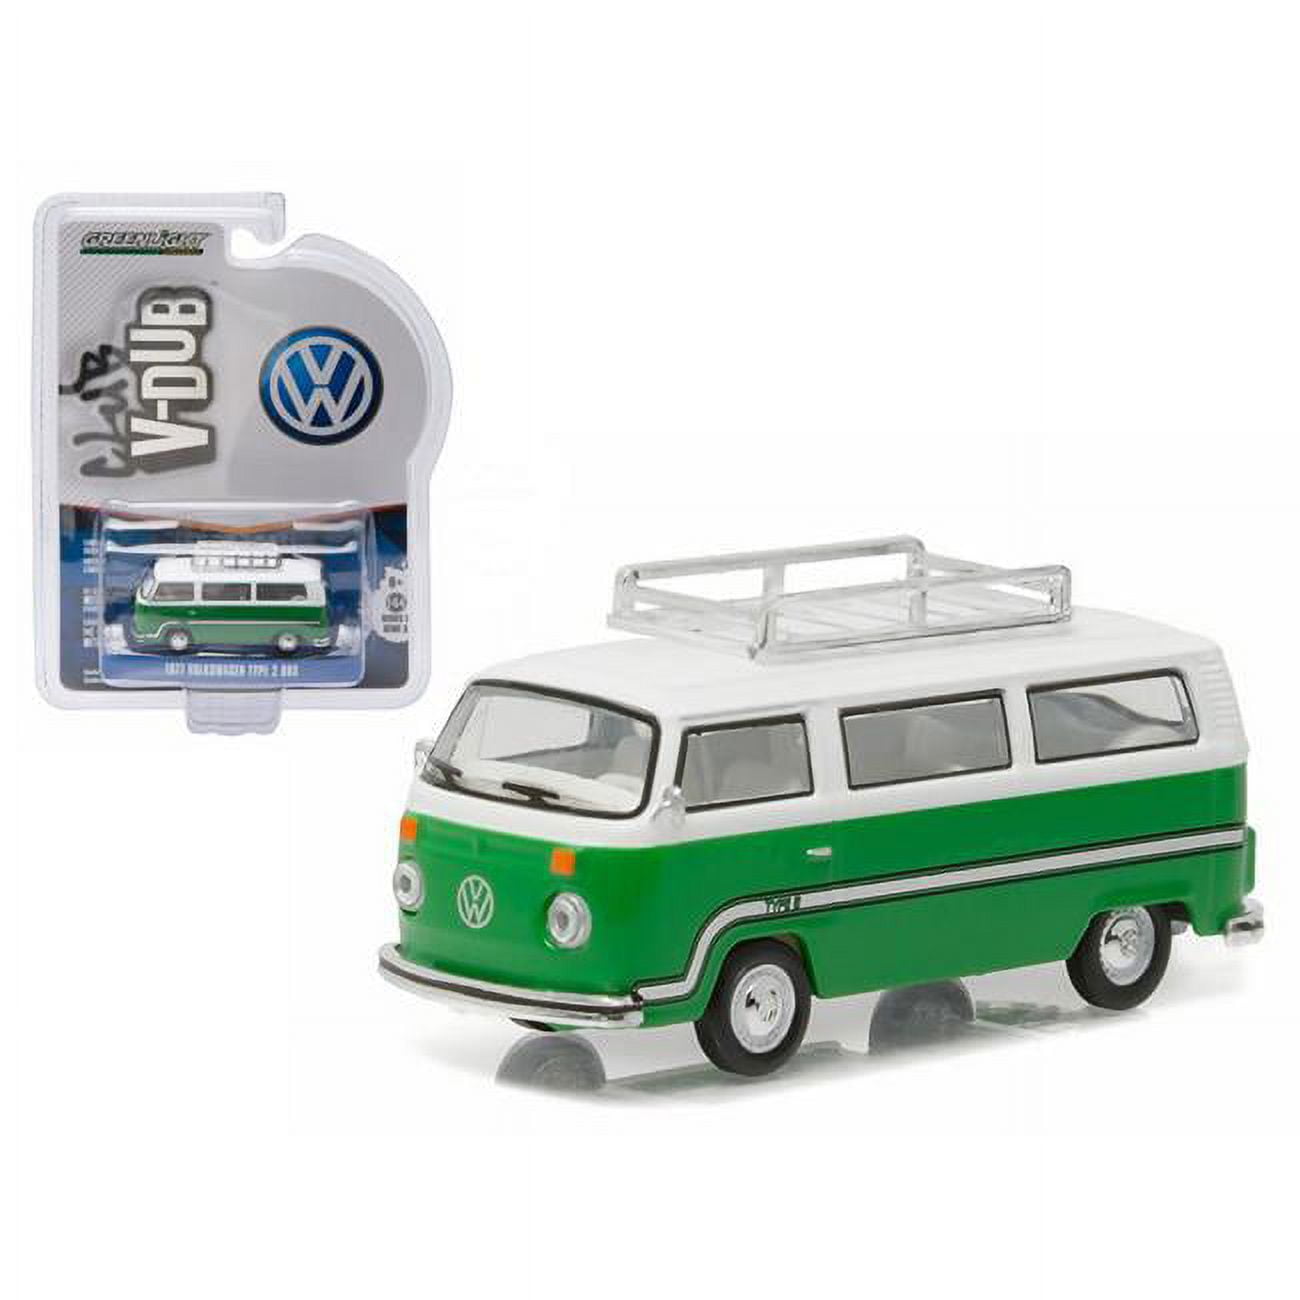 29840F 1 by 64 1977 Volkswagen Type Two Bus Sumatra with Roof Rack & Stripes, Green -  GreenLight